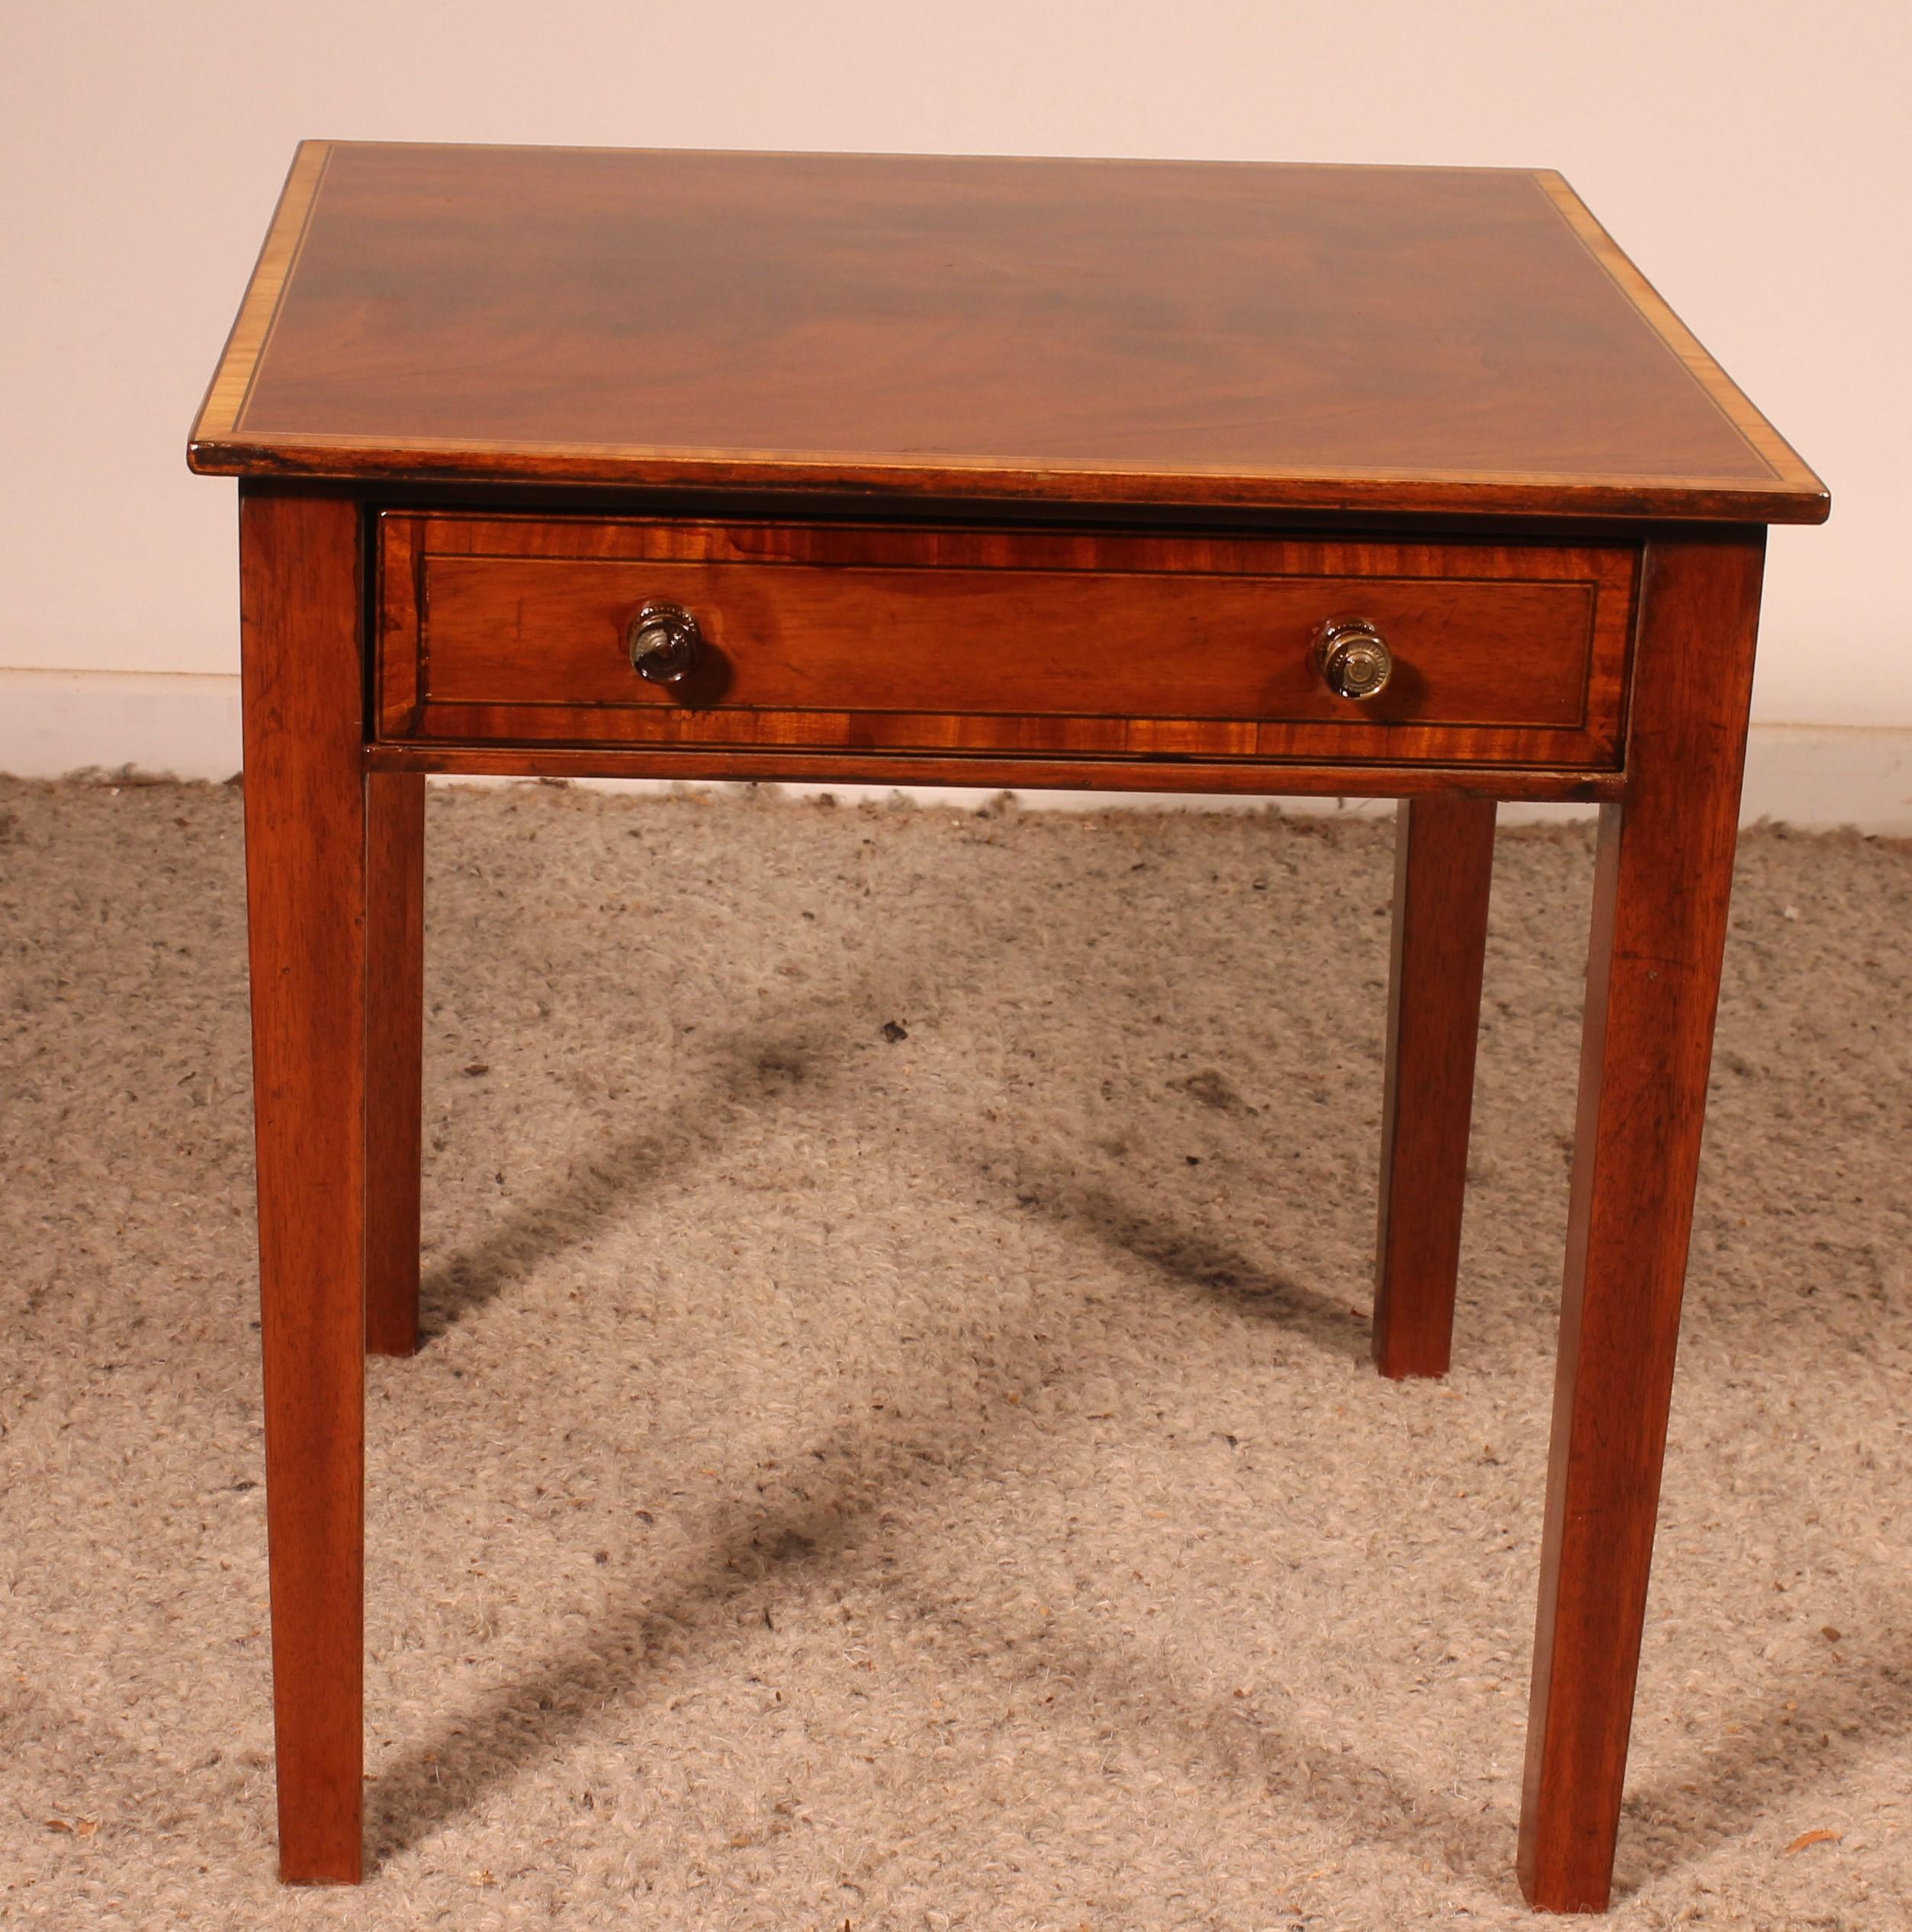 British Pair Of Mahogany Bedside Tables From The Early 19th Century For Sale